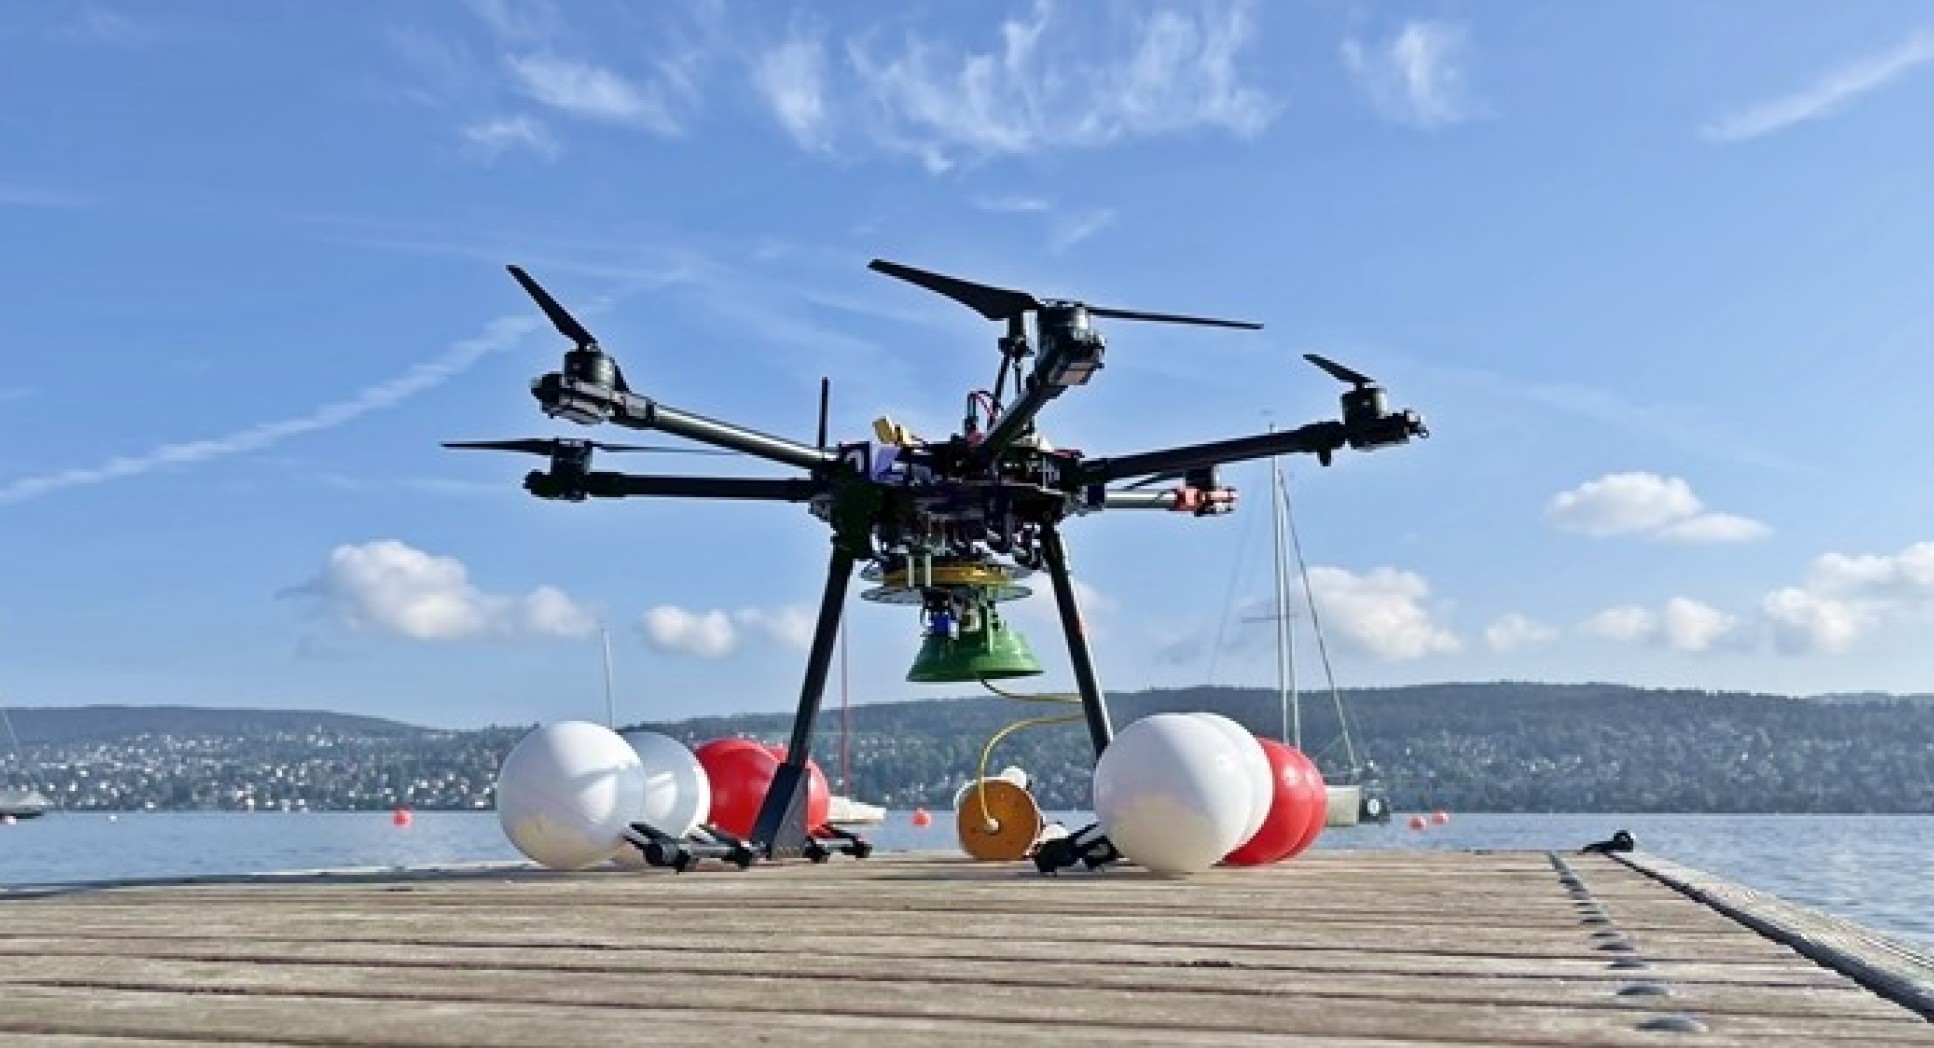 Shape-shifting drone collects samples to monitor water quality